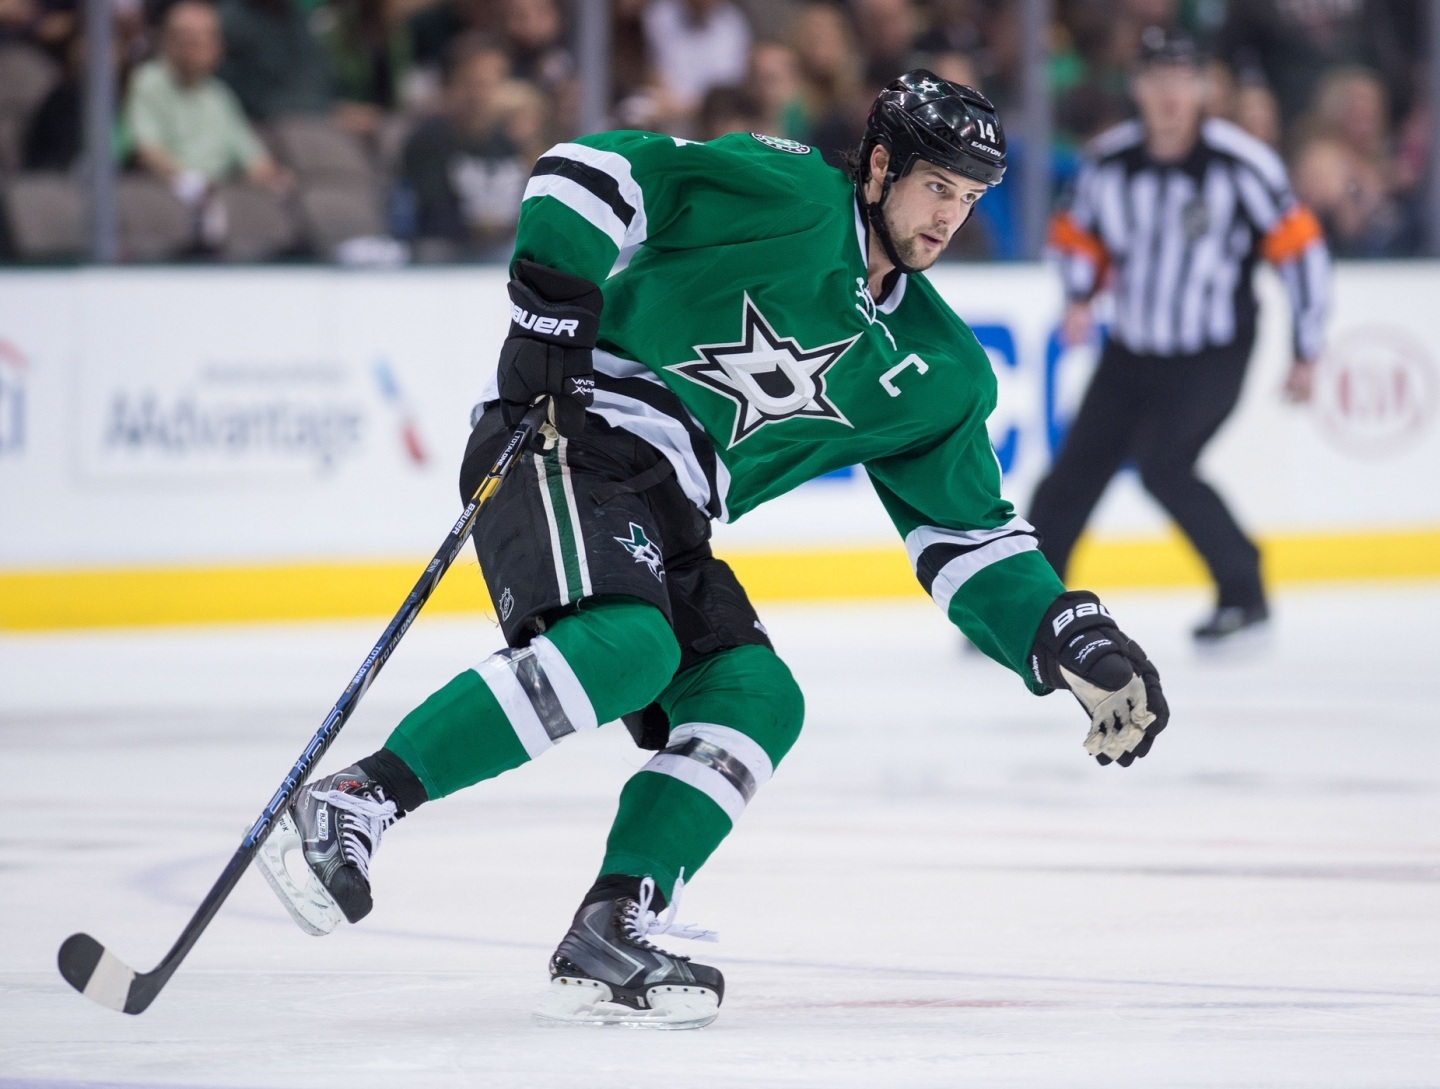 Jamie Benn Wallpaper Photo Shared By Penny Fans Share Image